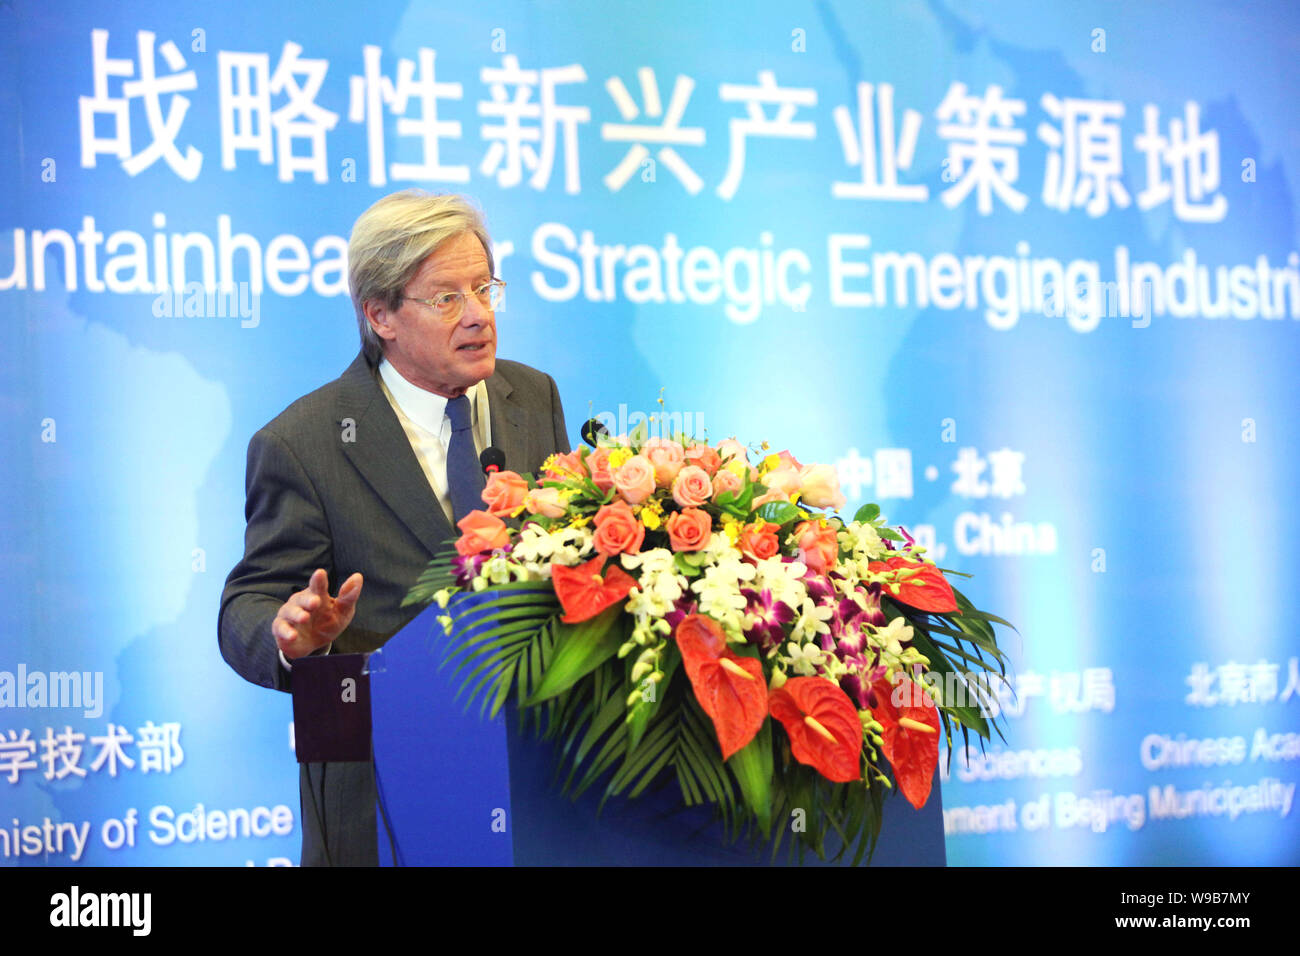 Jan-Michiel Hessels, Chairman of NYSE Euronext, speaks at the annual conference of Zhongguancun Forum 2010 in Beijing, China, October 20, 2010.   Duri Stock Photo